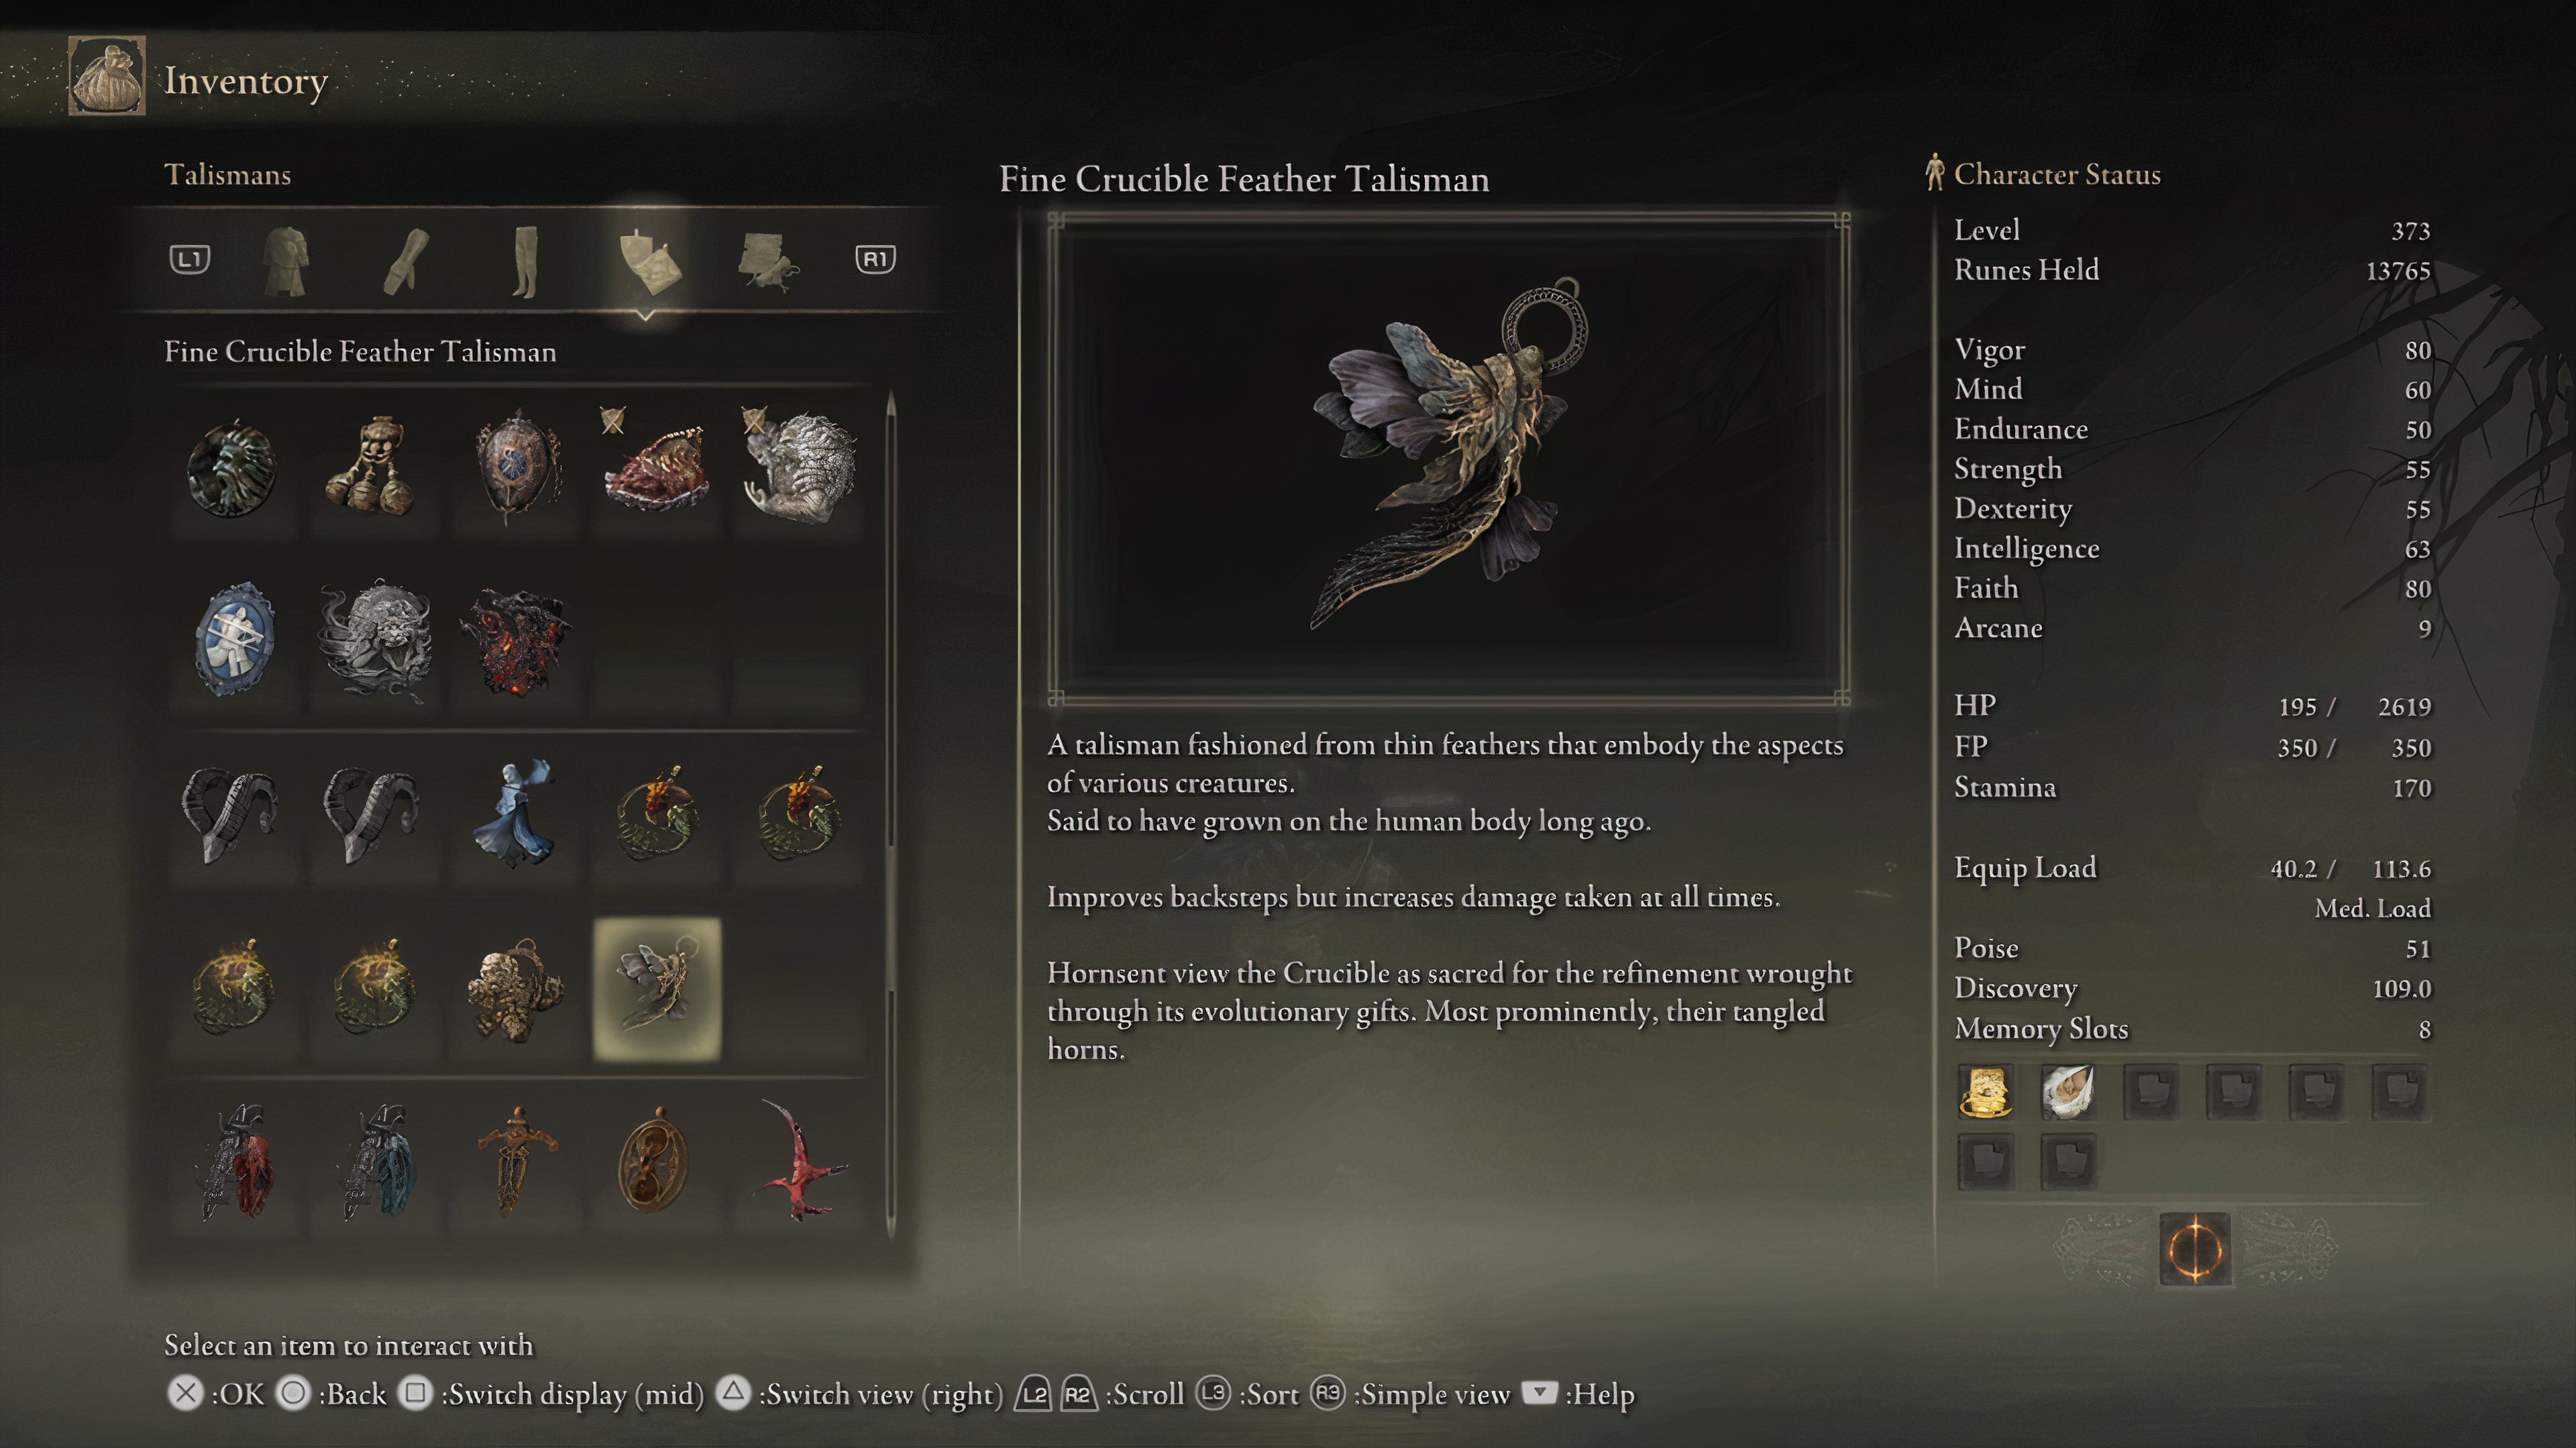 Fine Crucible Feather Talisman Information in Shadow of the Erdtree